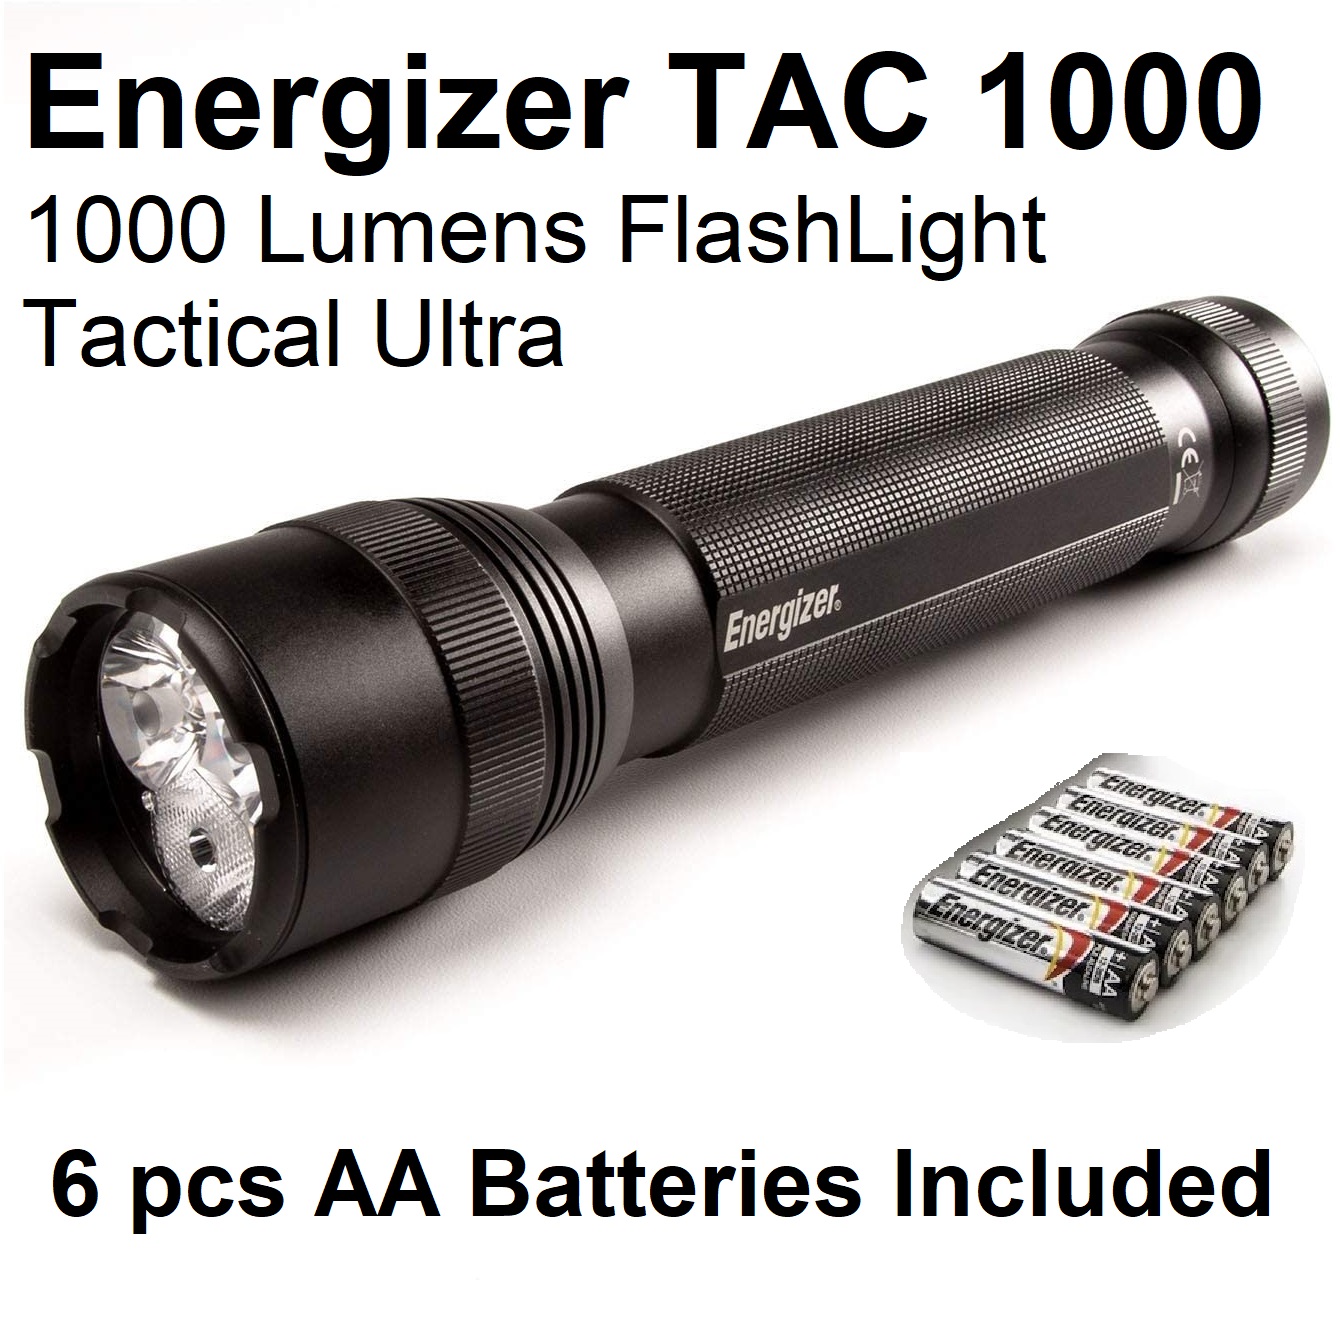 Energizer Tactical LED Torch TAC 1000 Ultra Tactical Flashlight AA  Batteries Included 1000 Lumens Energizer PMHT61 Flash Light Lazada PH